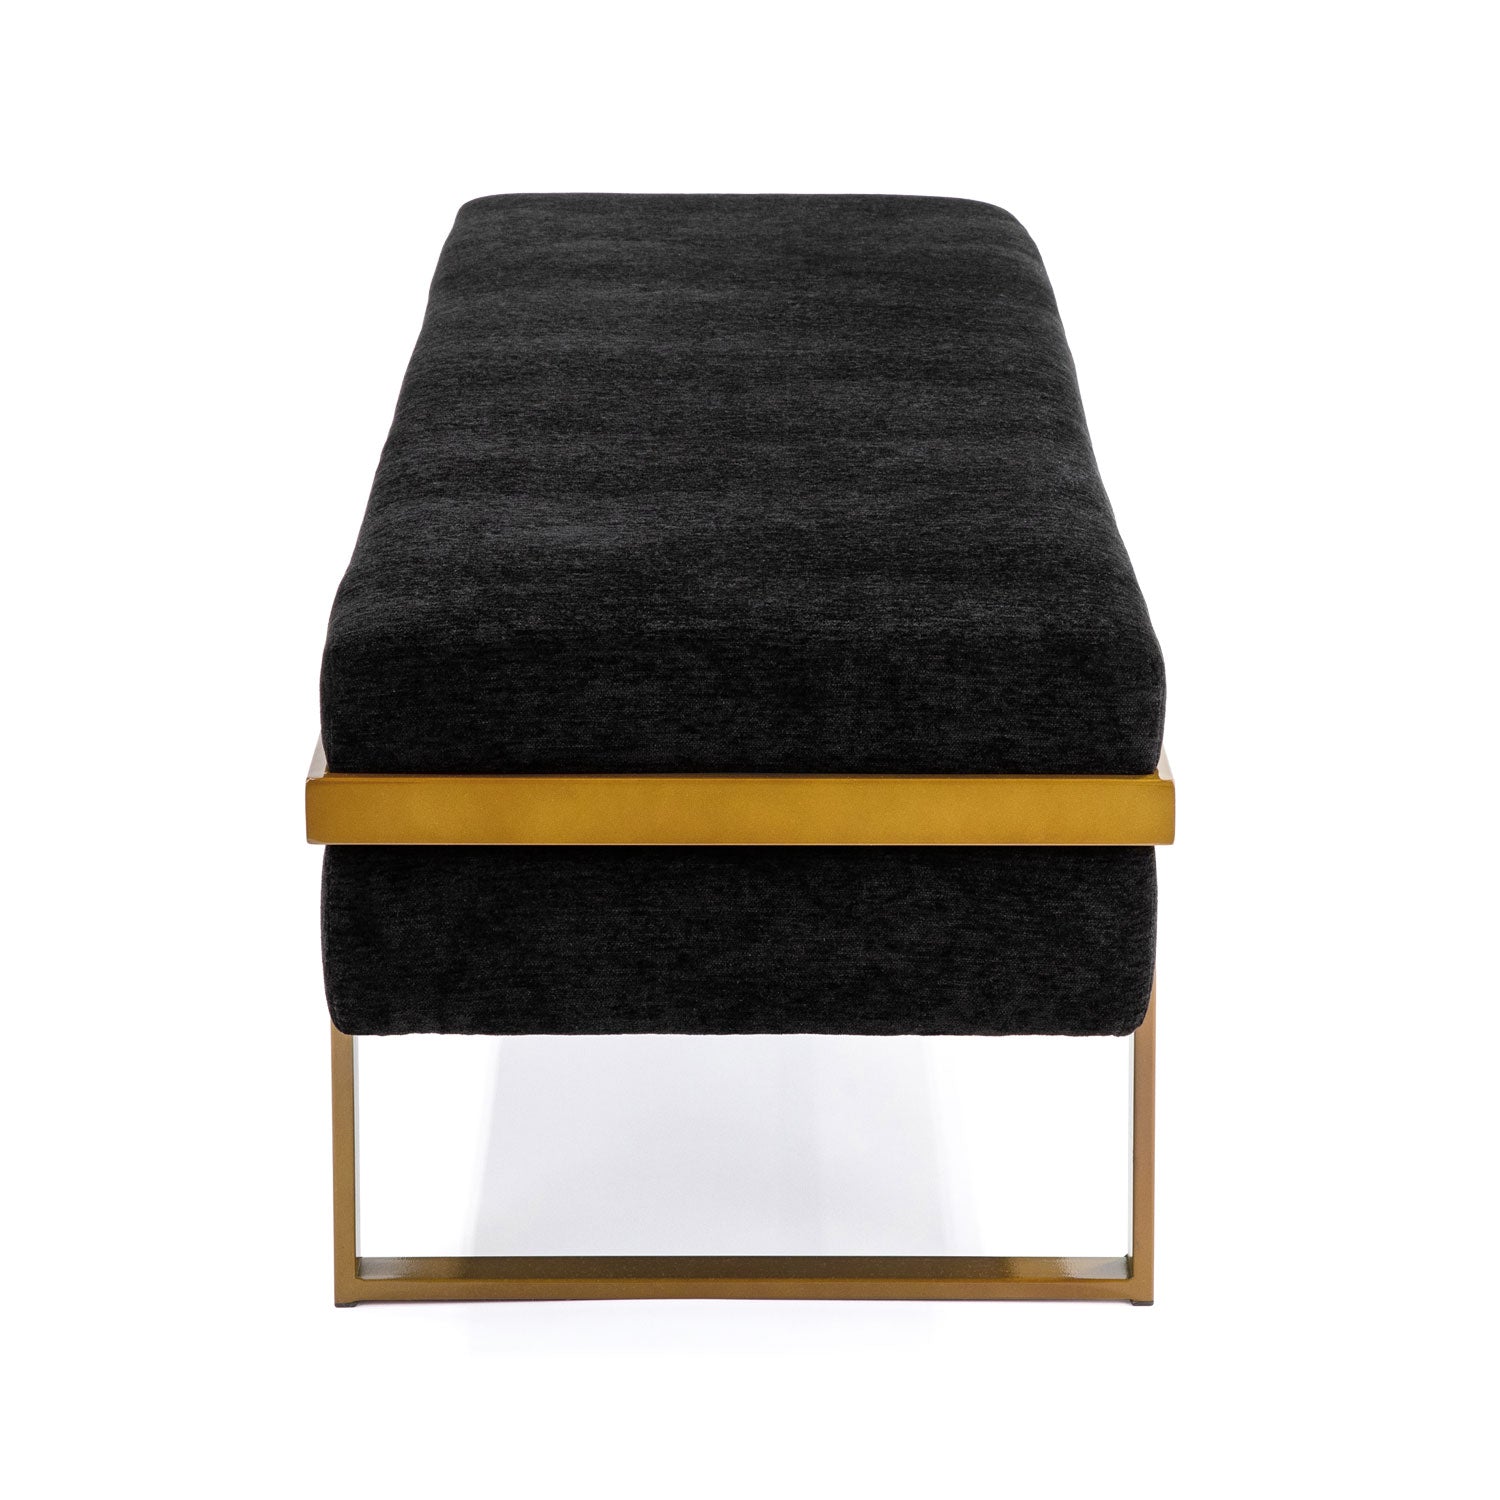 Wesley Allen Athena Bench with Sheen Gold Finish and Upholstered in Mid Black